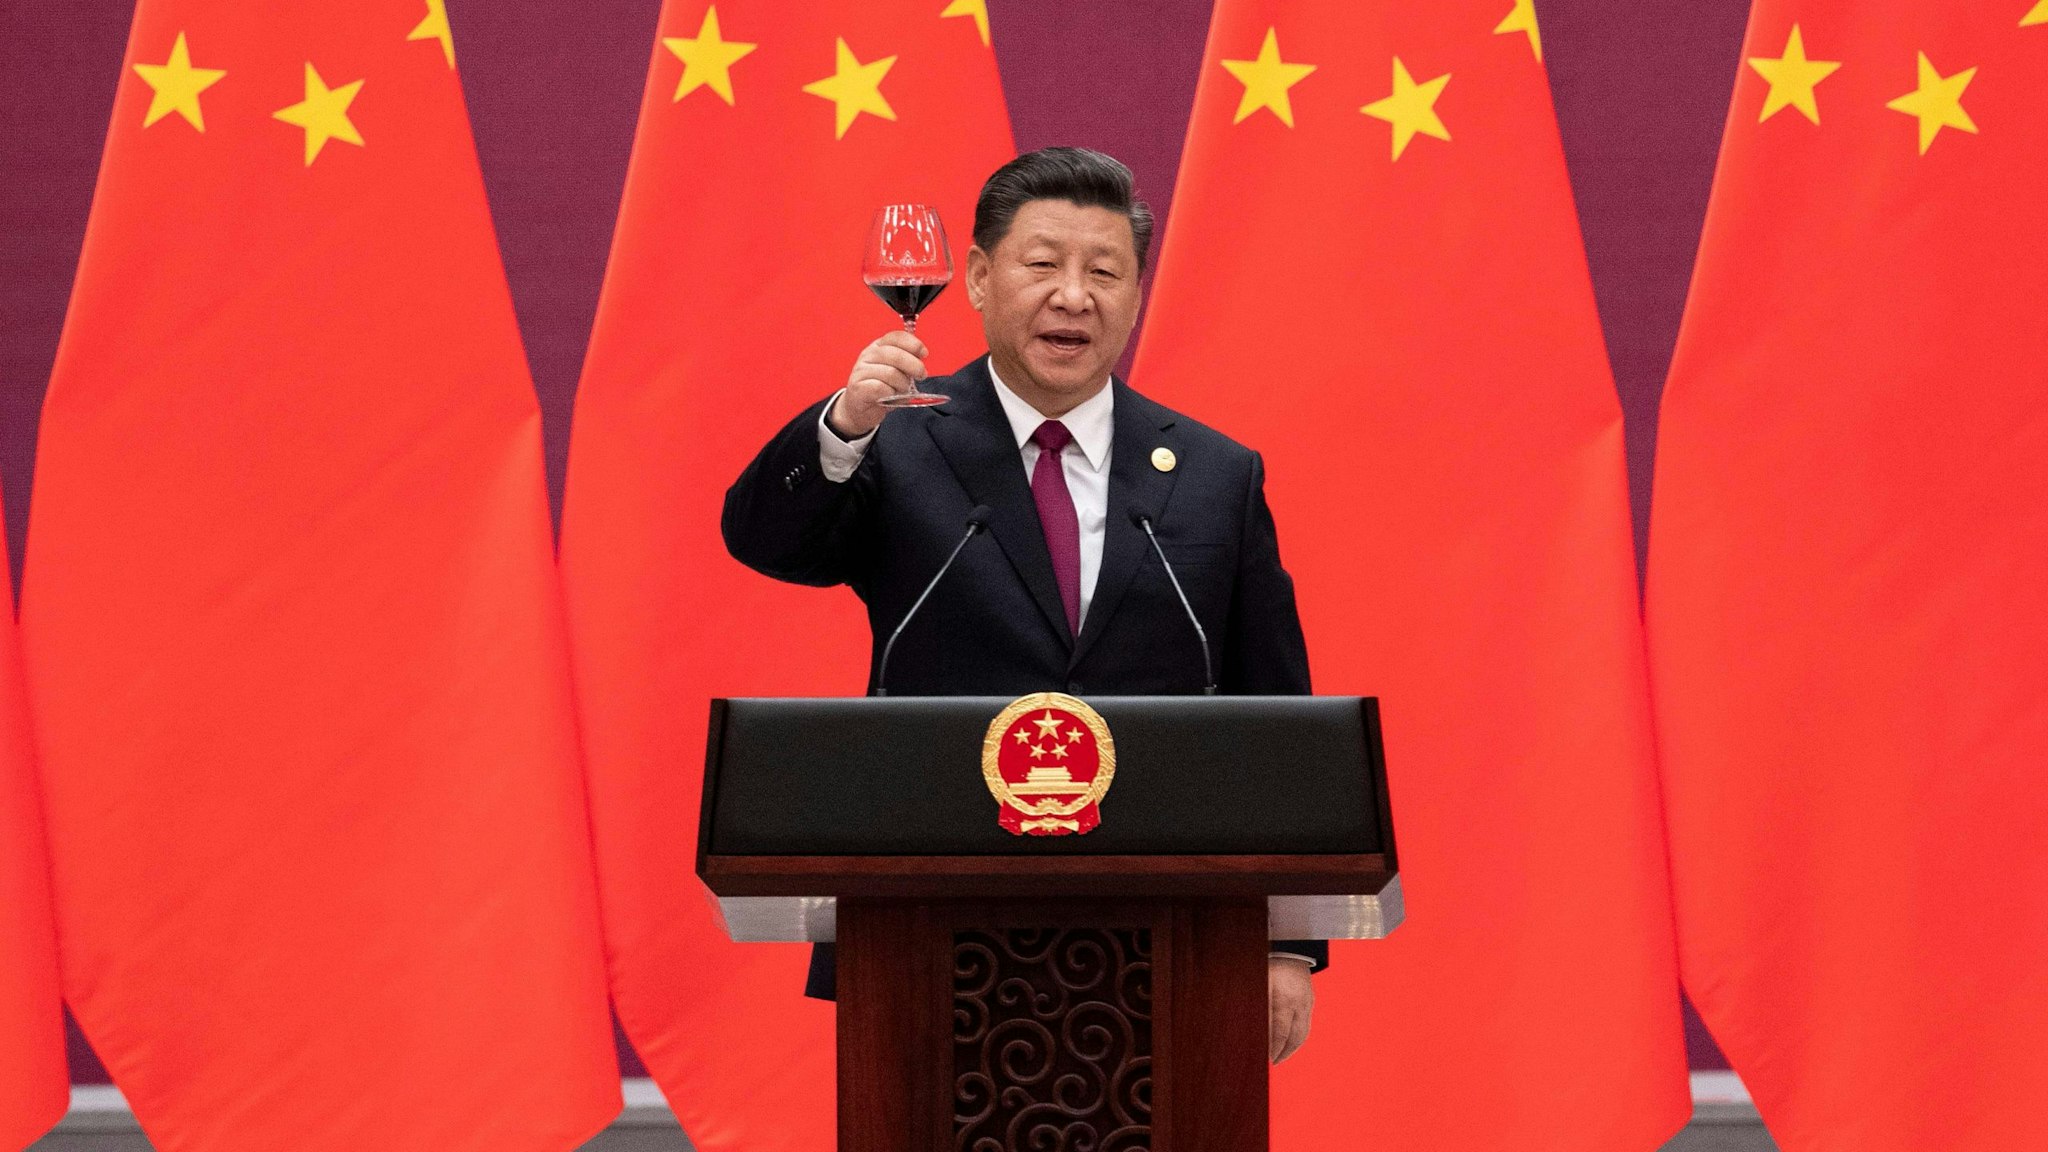 TOPSHOT - China's President Xi Jinping raises his glass and proposes a toast at the end of his speech during the welcome banquet for leaders attending the Belt and Road Forum at the Great Hall of the People in Beijing on April 26, 2019.